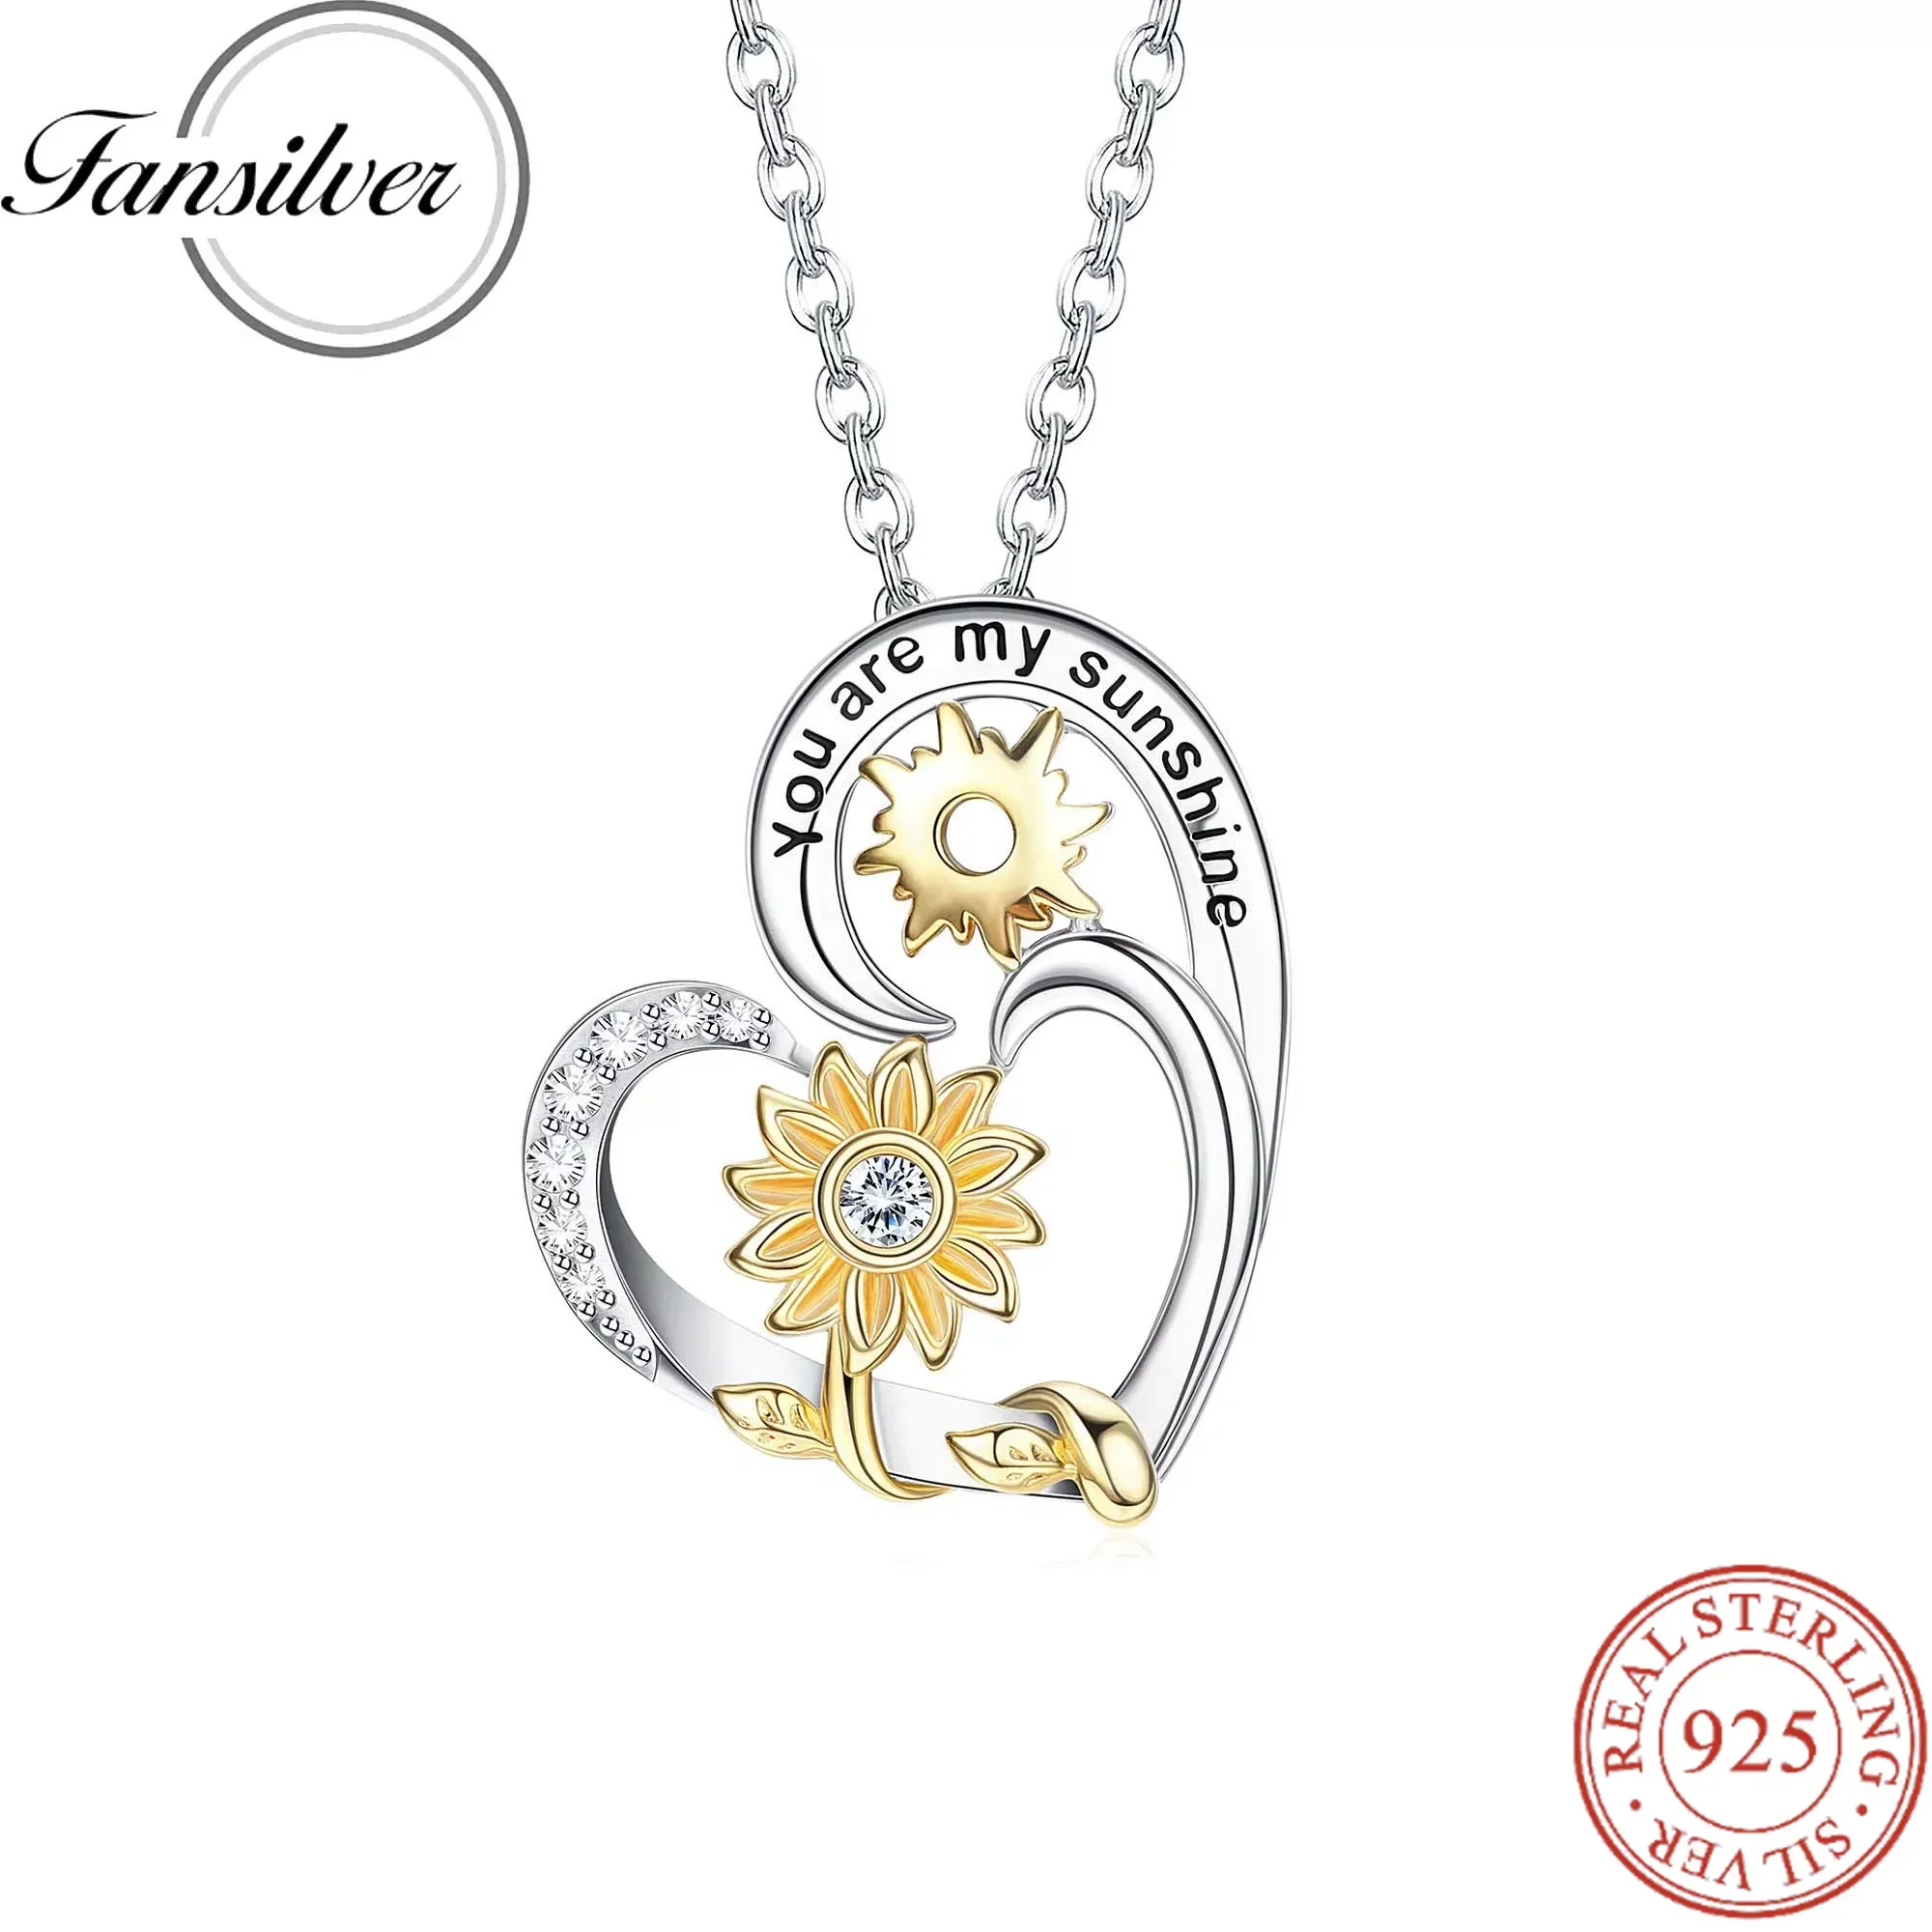 

Fansilver 925 Sterling Silver Necklace 14K Gold Plated You're My Sunshine Sunflower Heart Pendant Neck Chain Valentines Day Gift